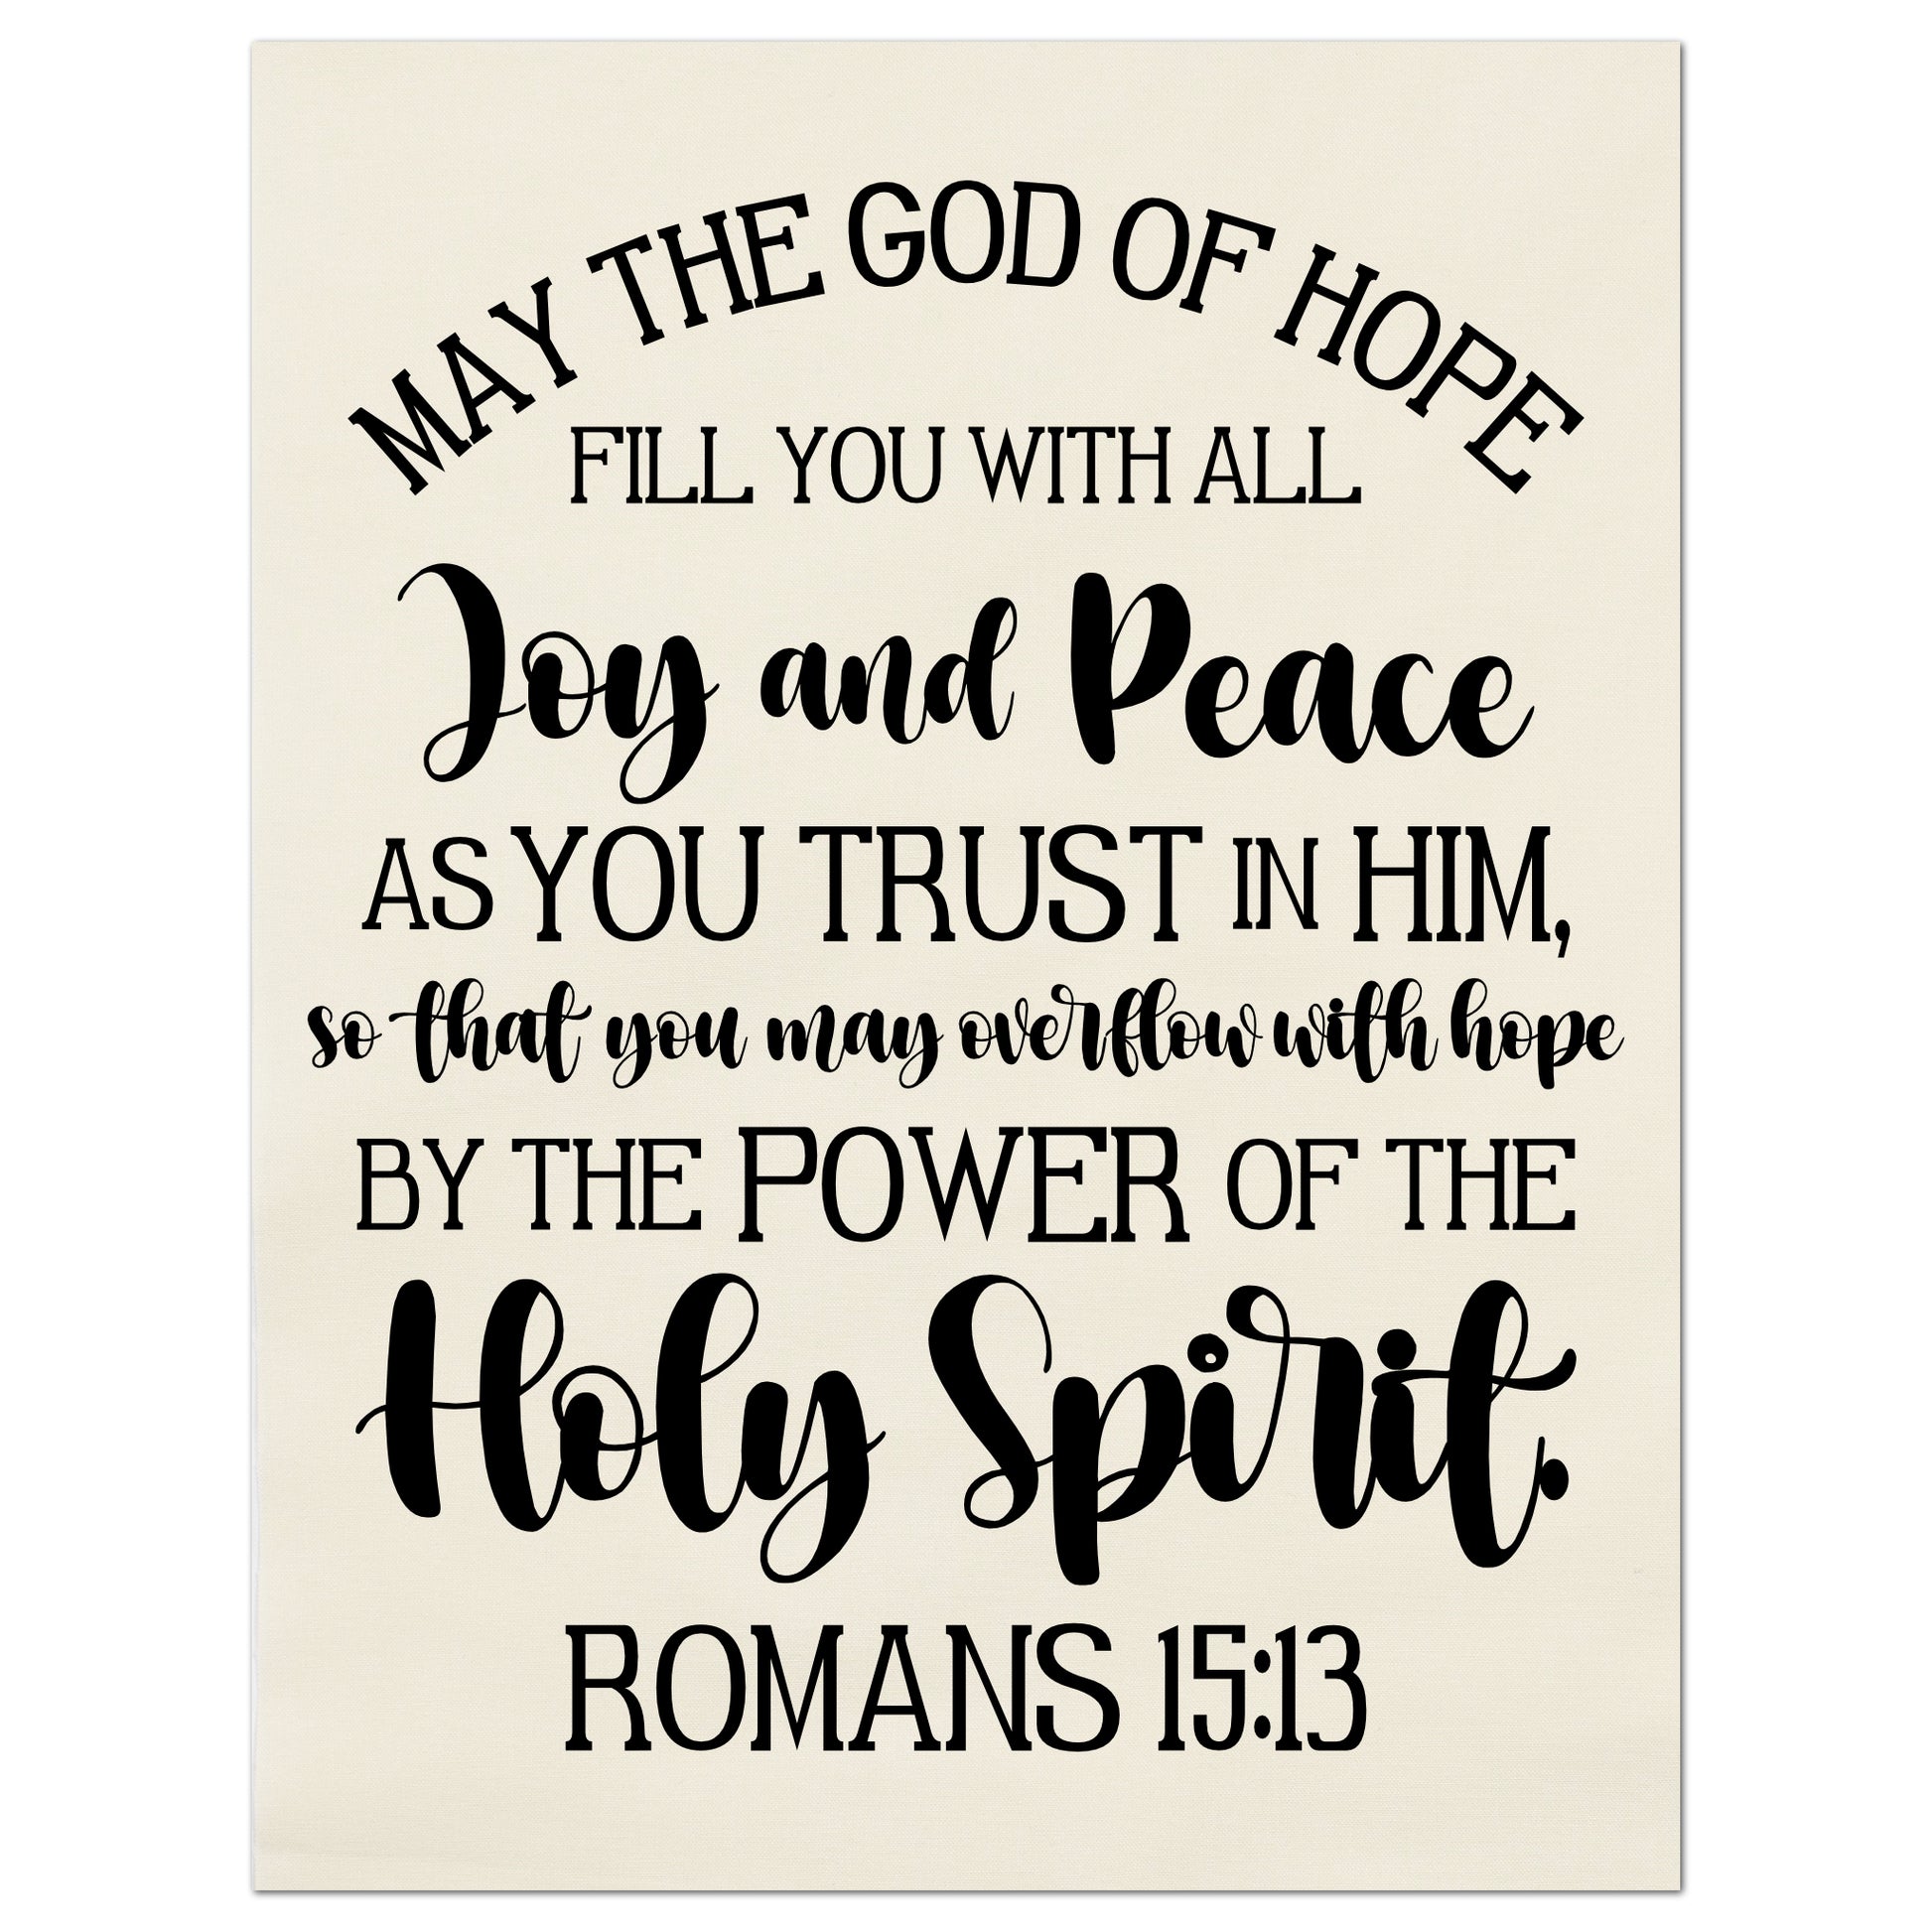 Romans 5:13 - May the God of hope fill you with all joy and peace as you trust in Him, so that you may overflow with hope by the power of the Holy Spirit - Romans 15:13 - Fabric Panel Print, Quilt Block